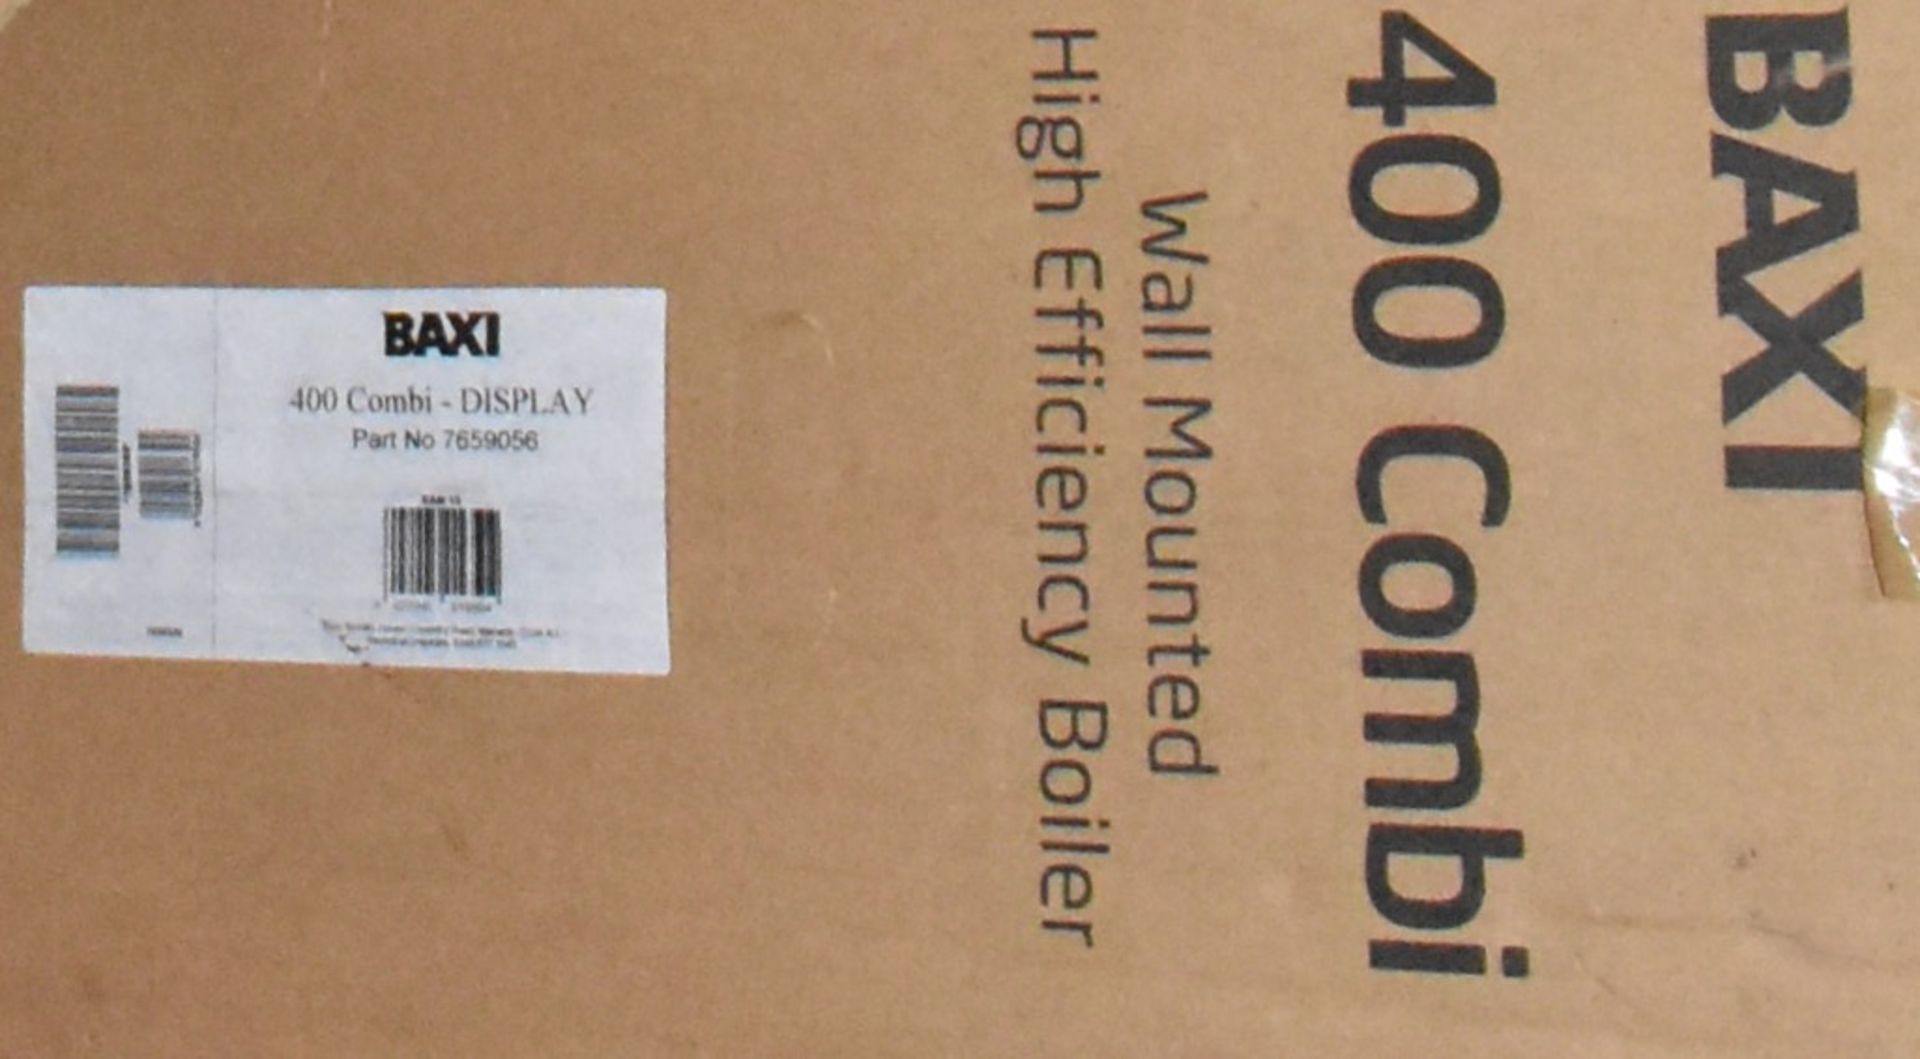 1 x BAXI 400 Wall Mounted Combi Boiler - Dummy Display Item - New and Sealed - Image 3 of 3